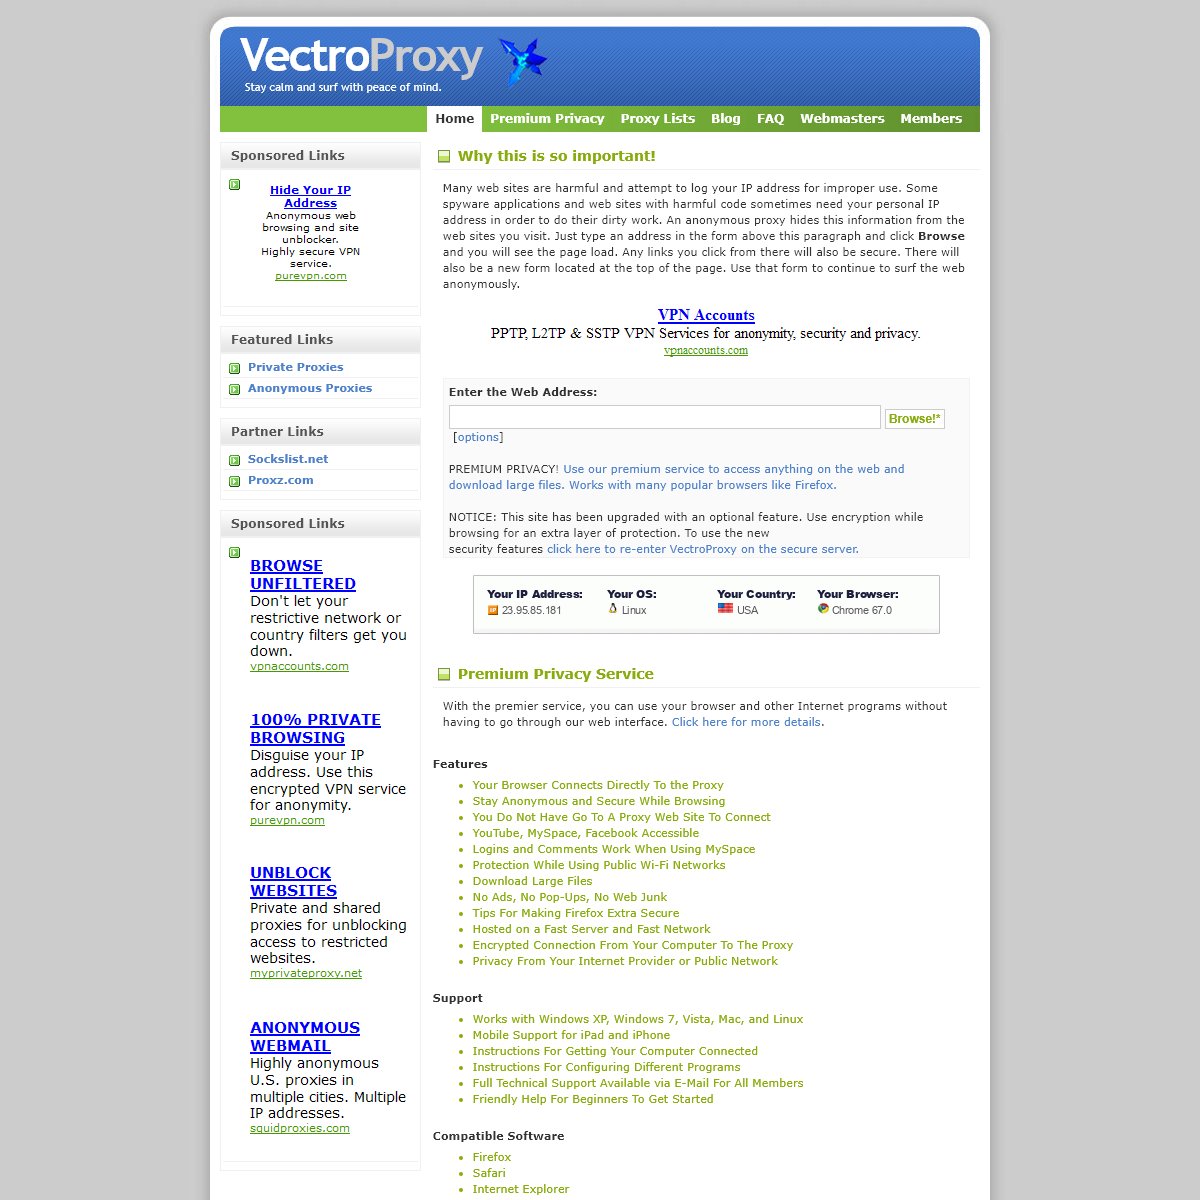 A complete backup of vectroproxy.com